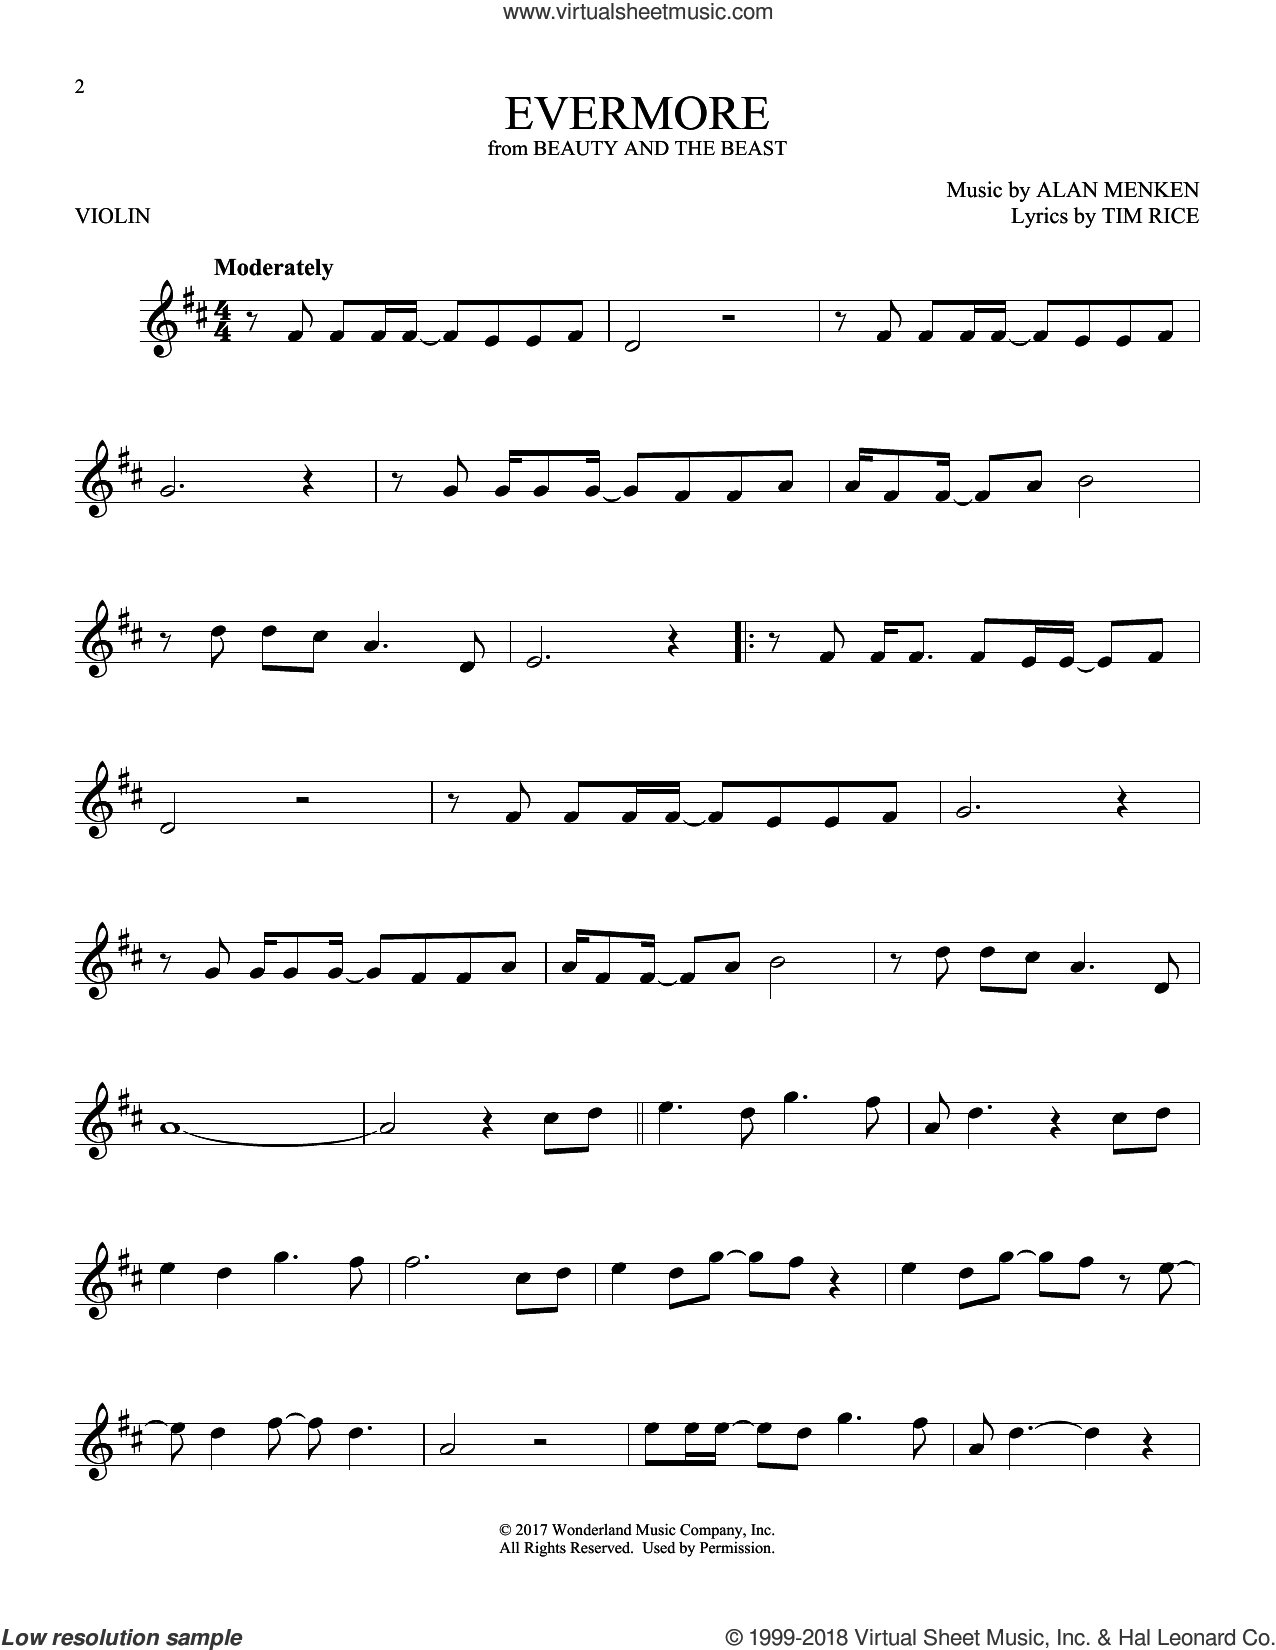 Groban - Evermore (from Beauty And The Beast) sheet music for violin solo